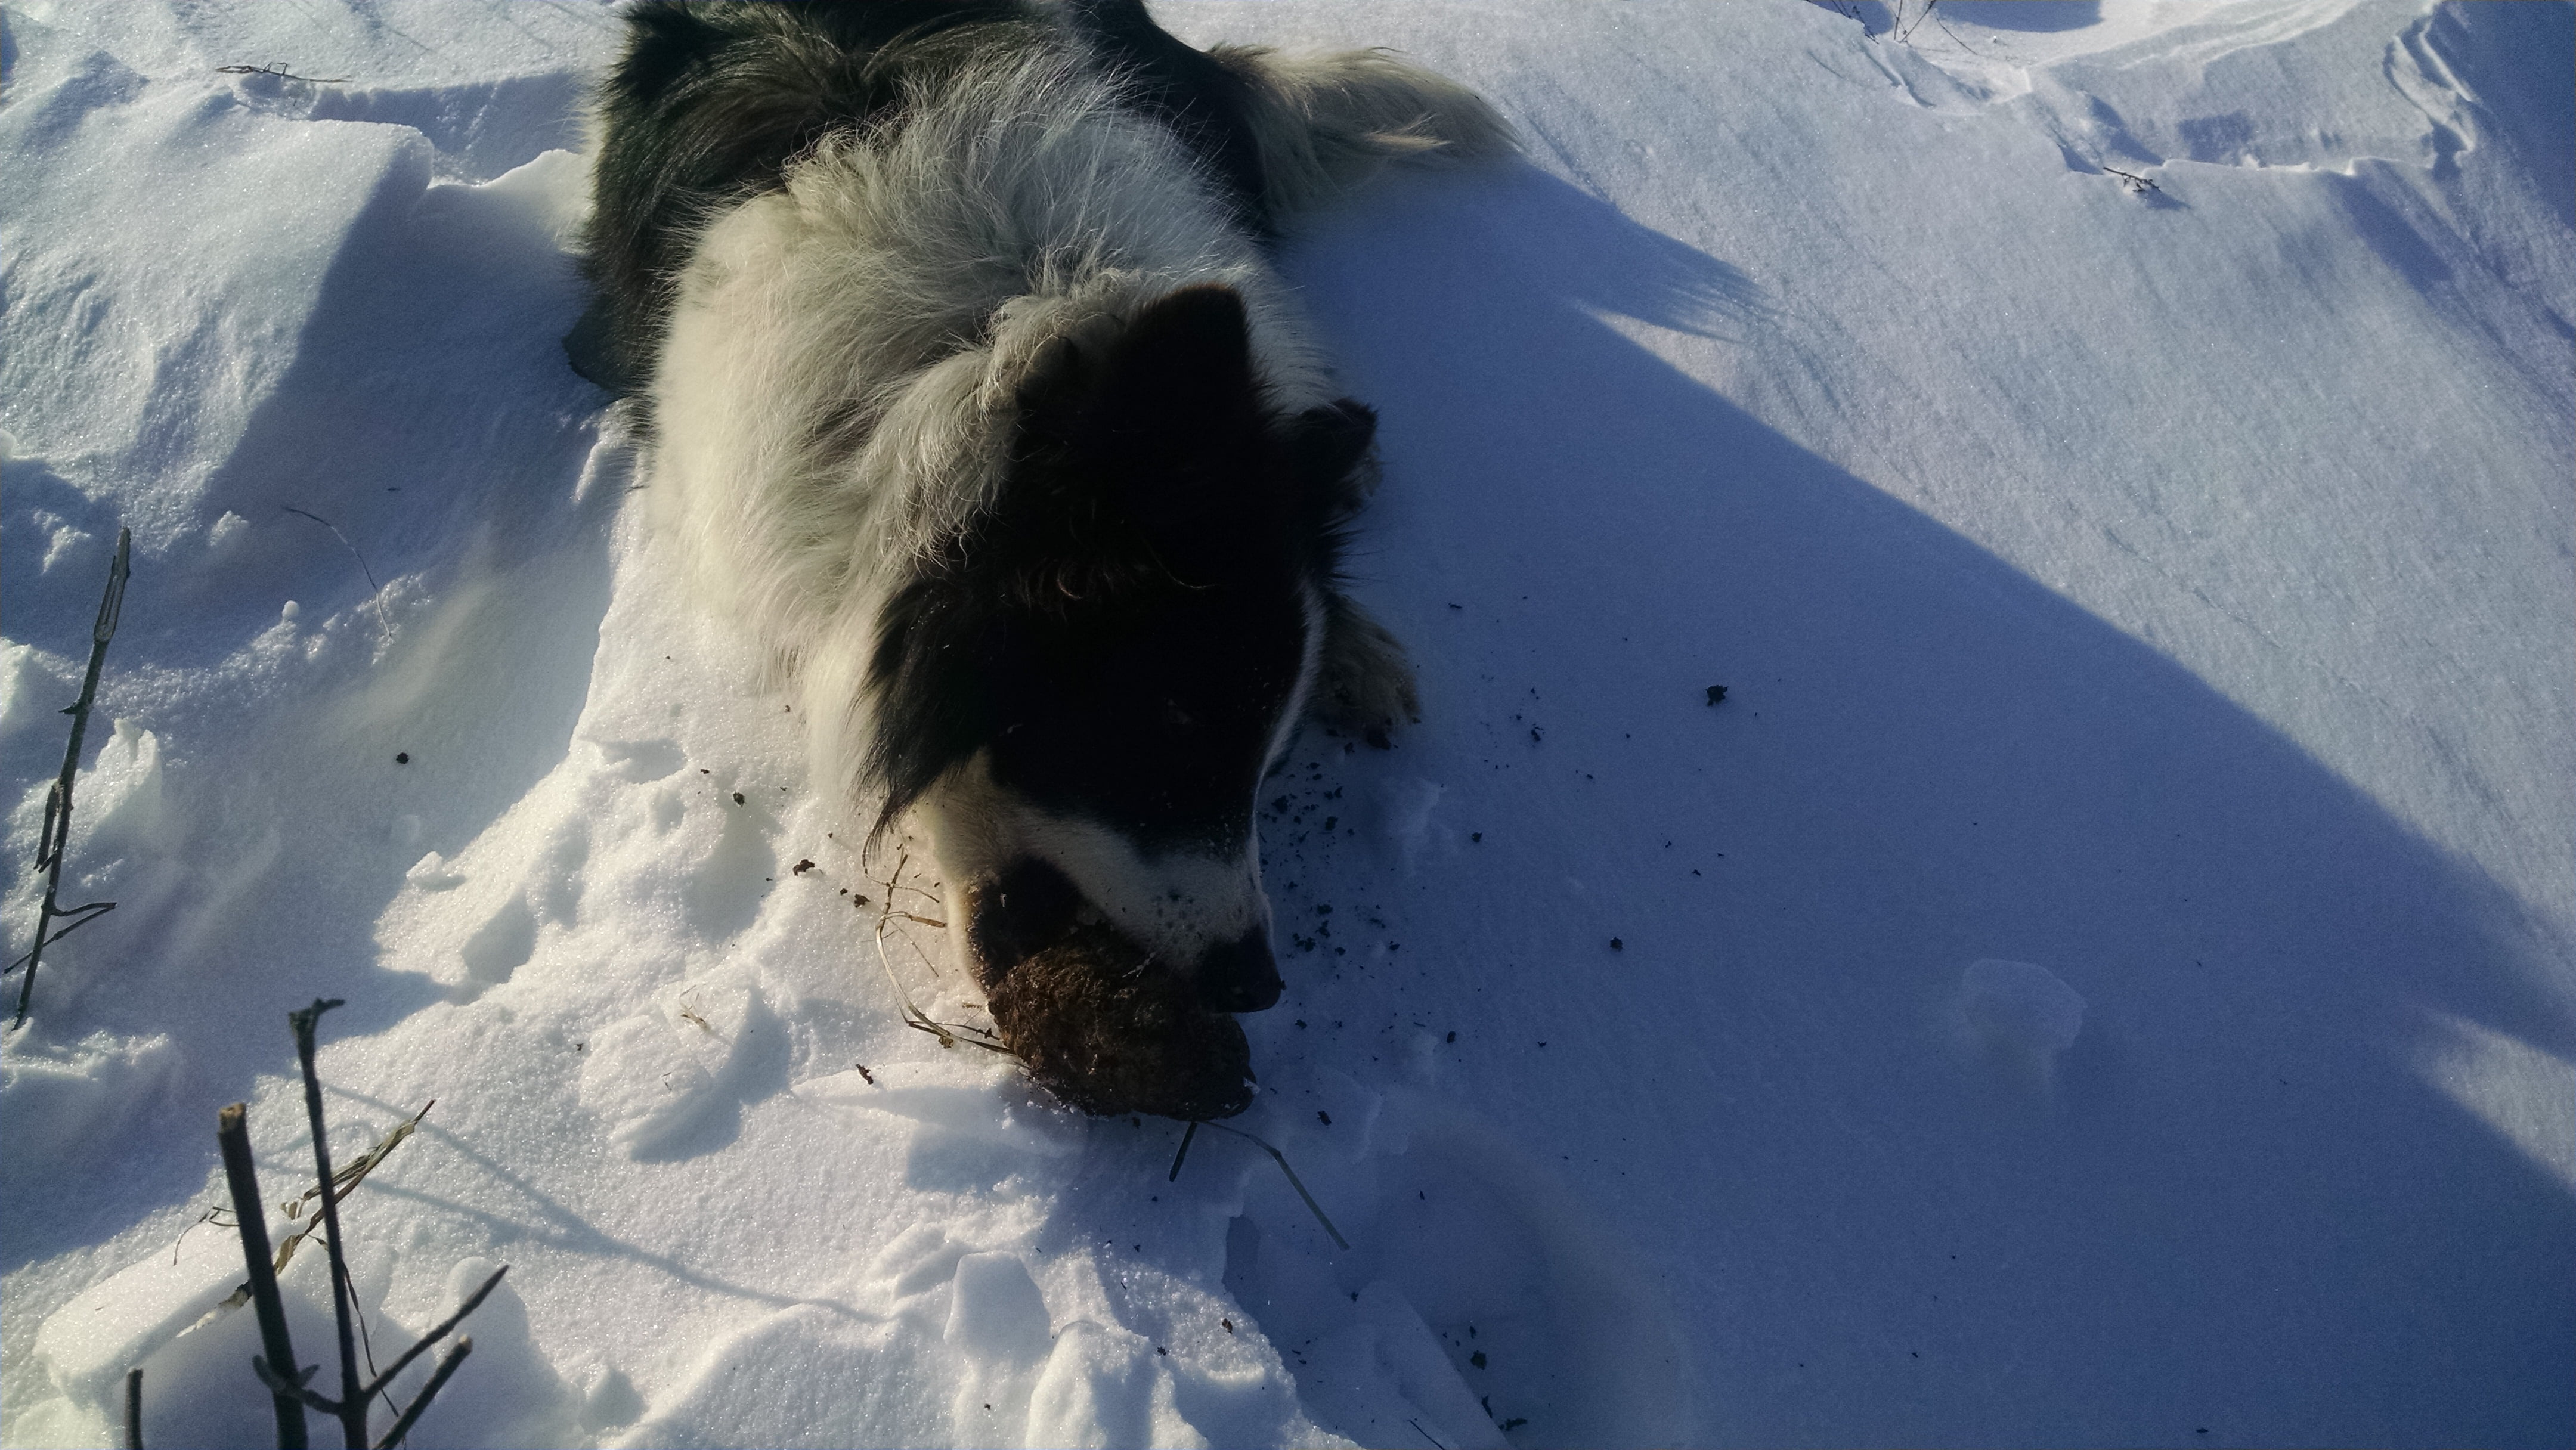 What a dog really wants:  turds.  Here he's gnawing frozen cow turds.  But pig, chicken, and cat turds are all relished.